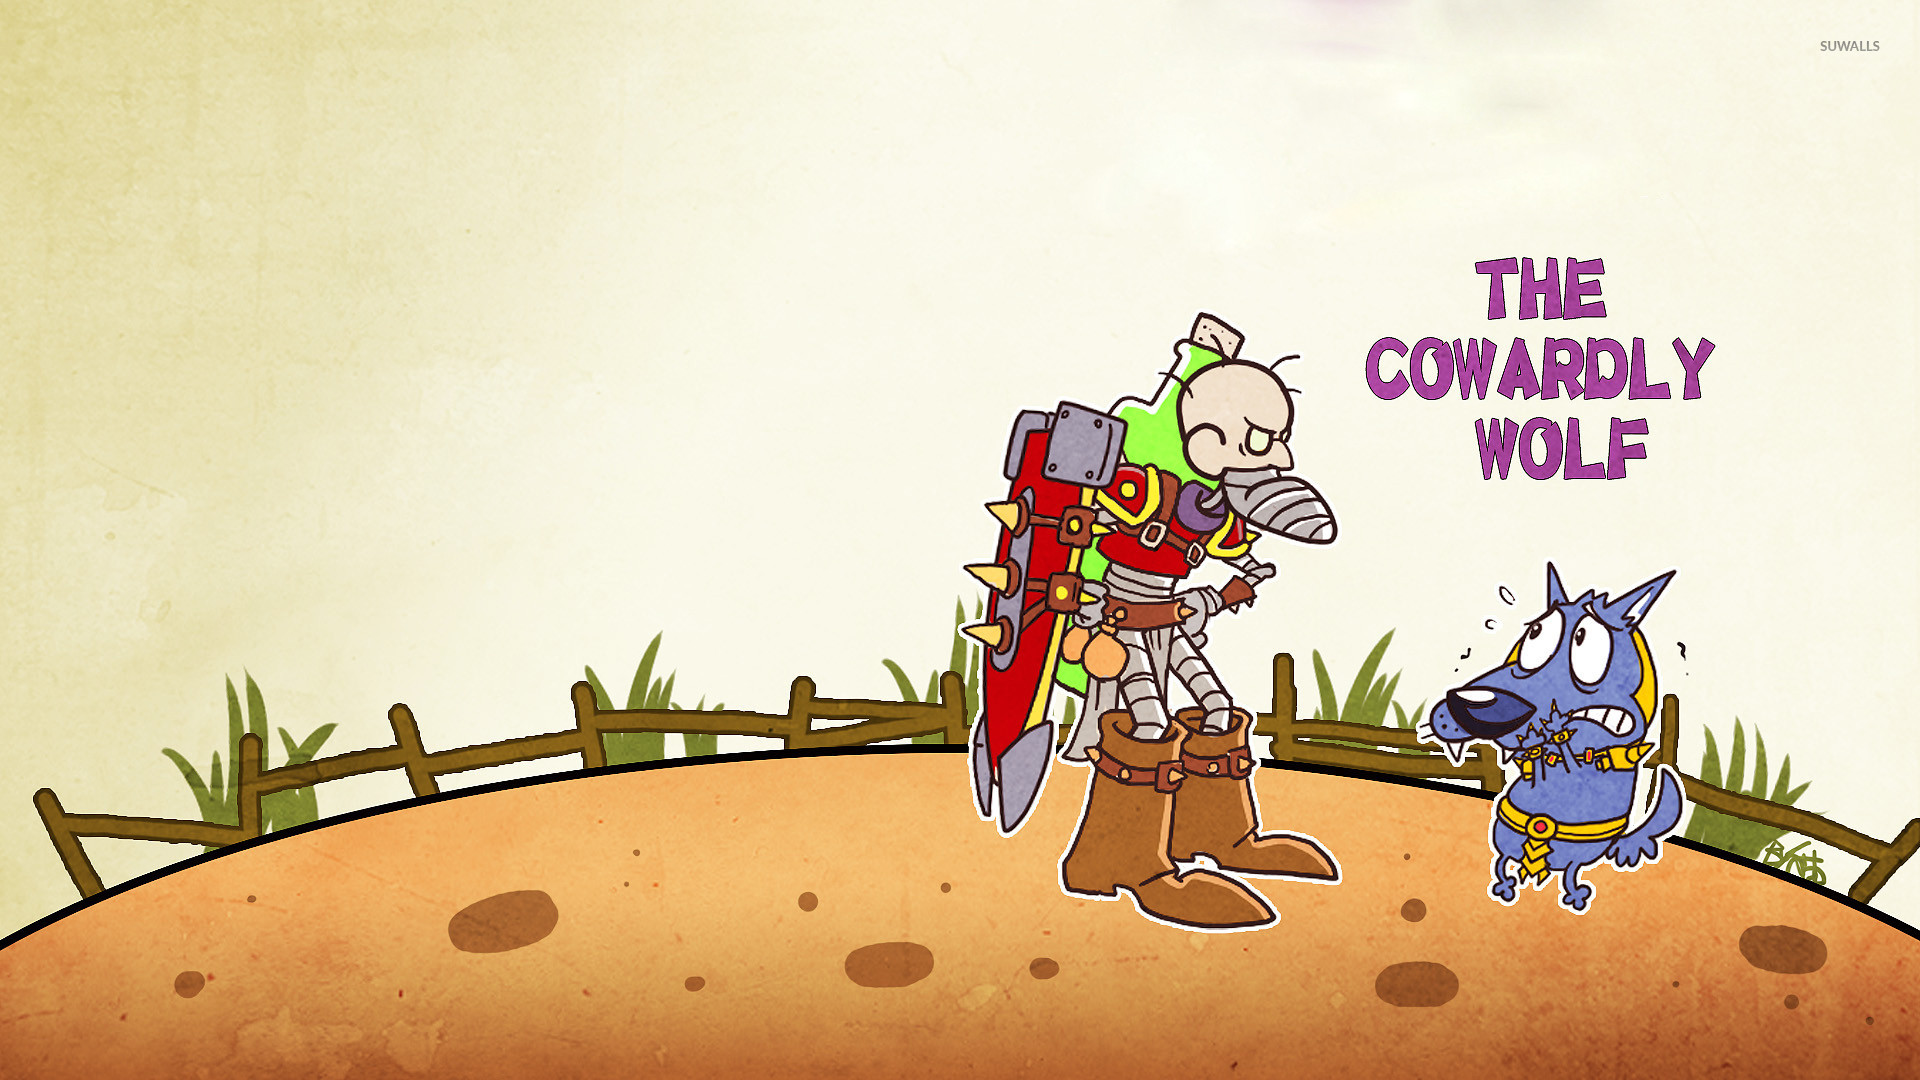 1920x1080 Courage and Eustace from Courage the Cowardly Wolf wallpaper